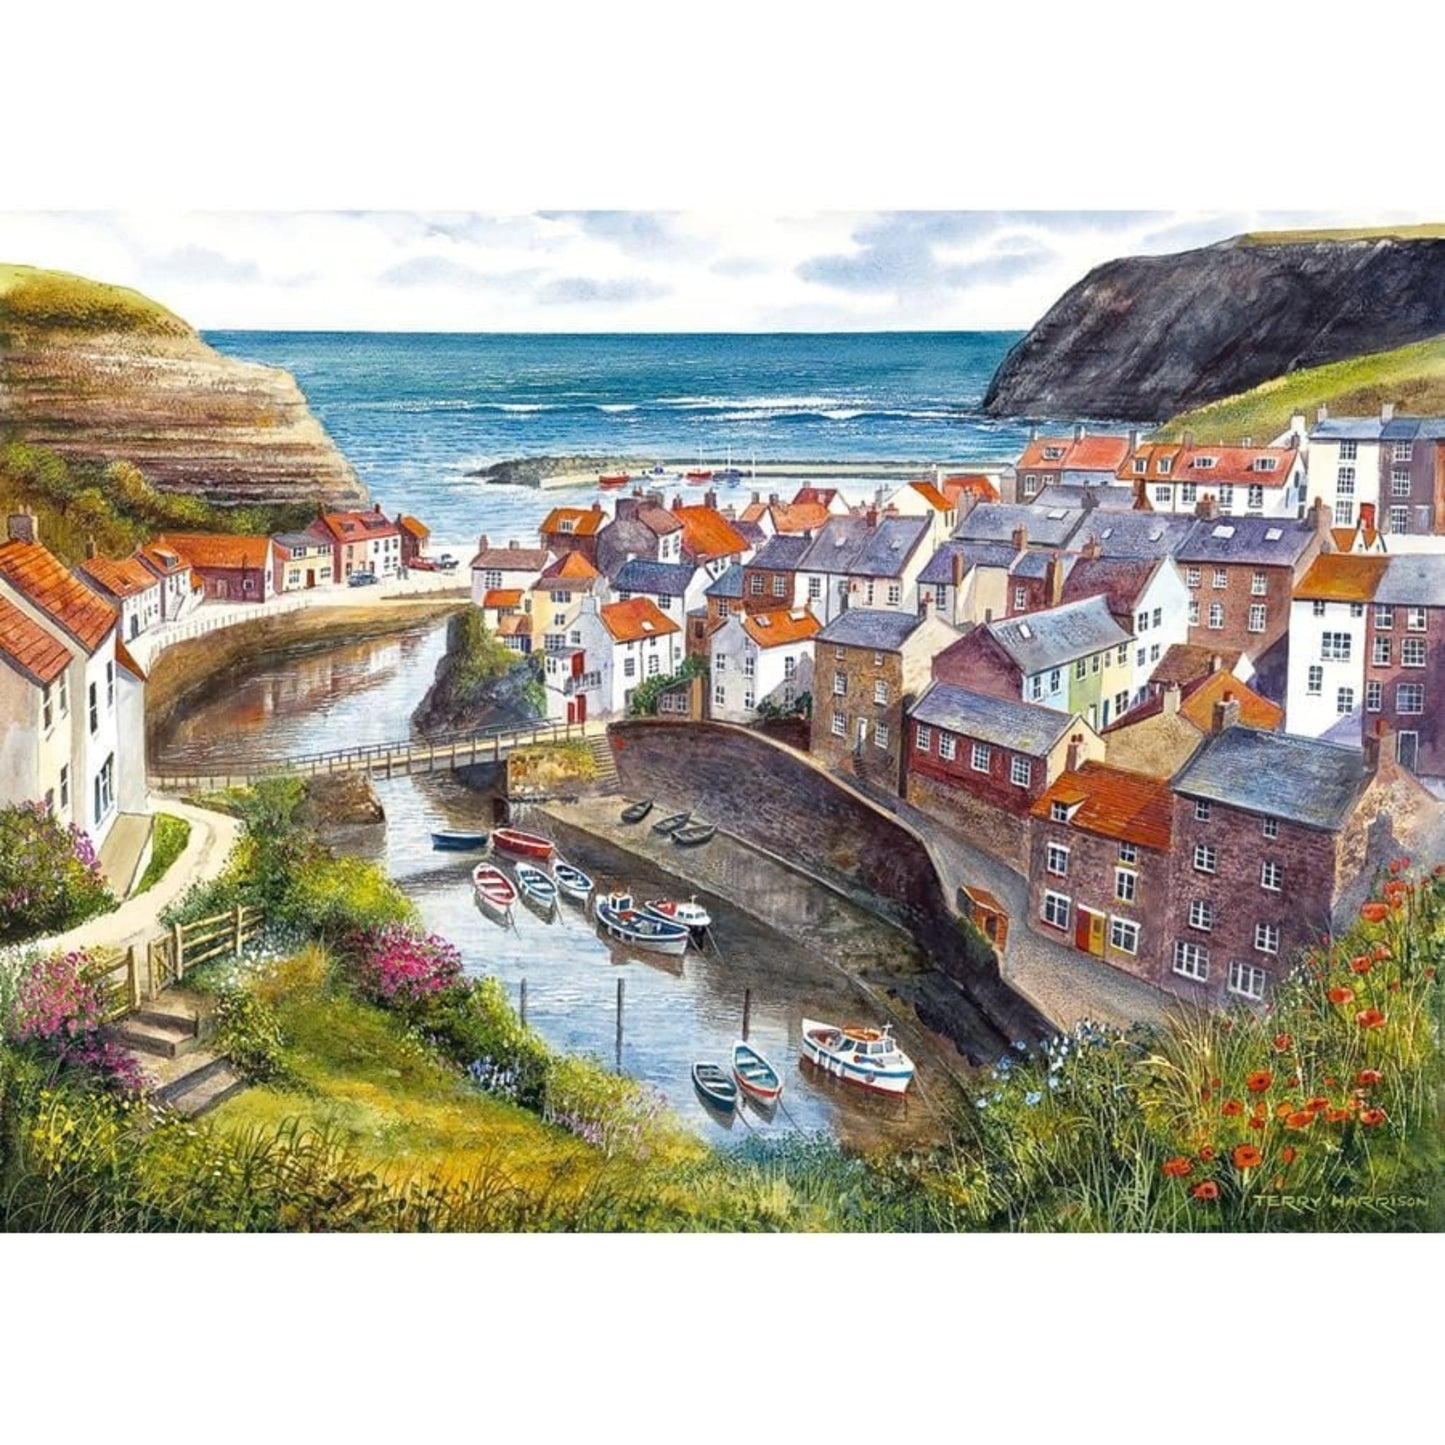 Staithes 1000 Piece Jigsaw Puzzle - The Great Yorkshire Shop